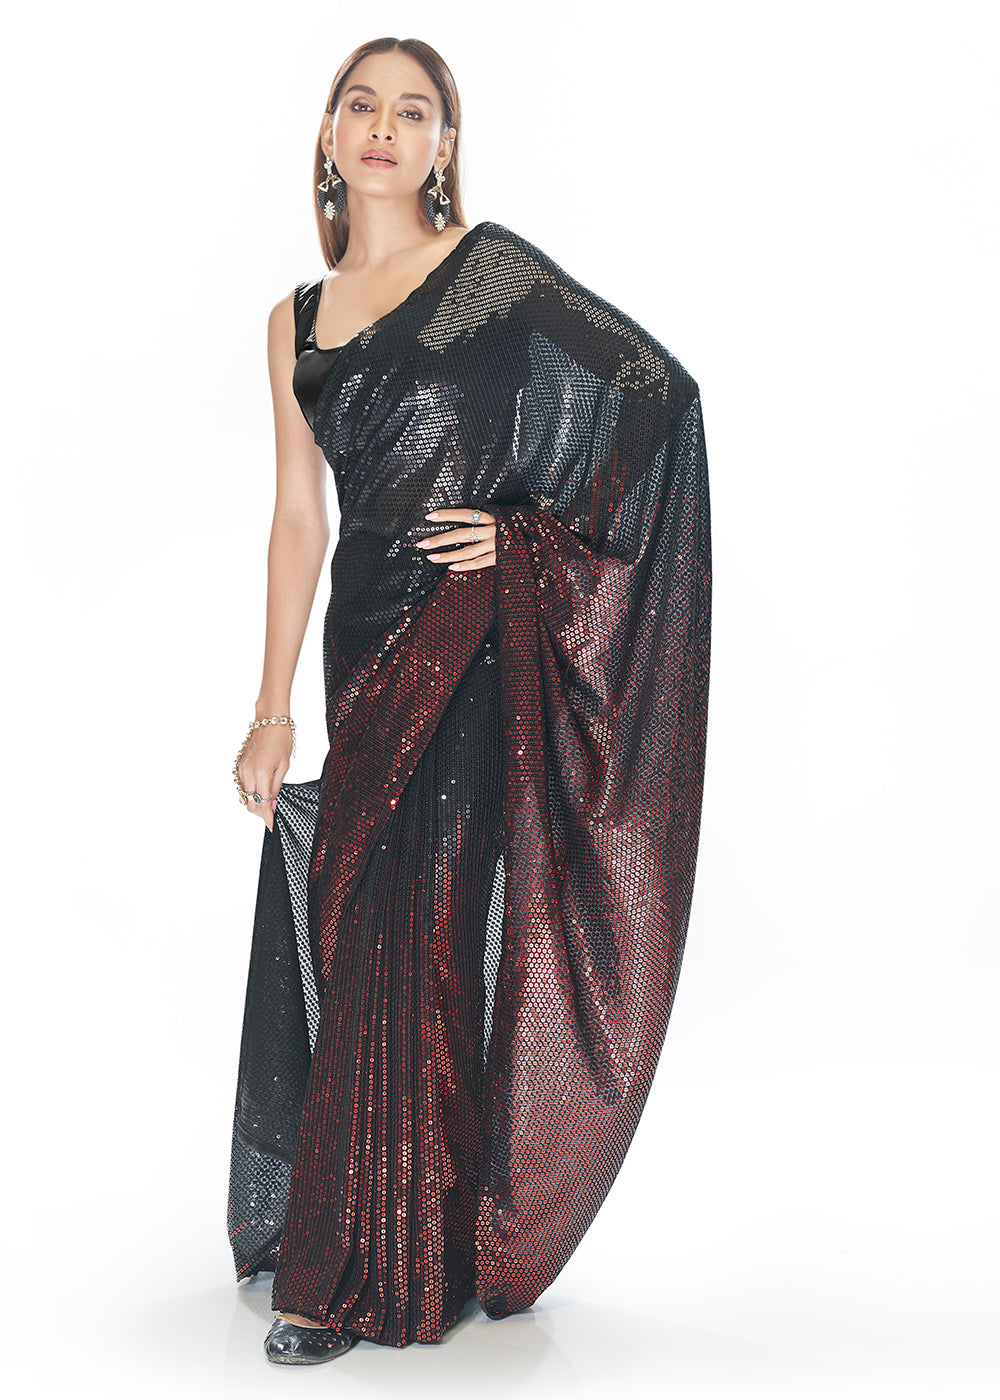 Stiched Red Silk Saree With Red Sequin Blouse – Faash Wear